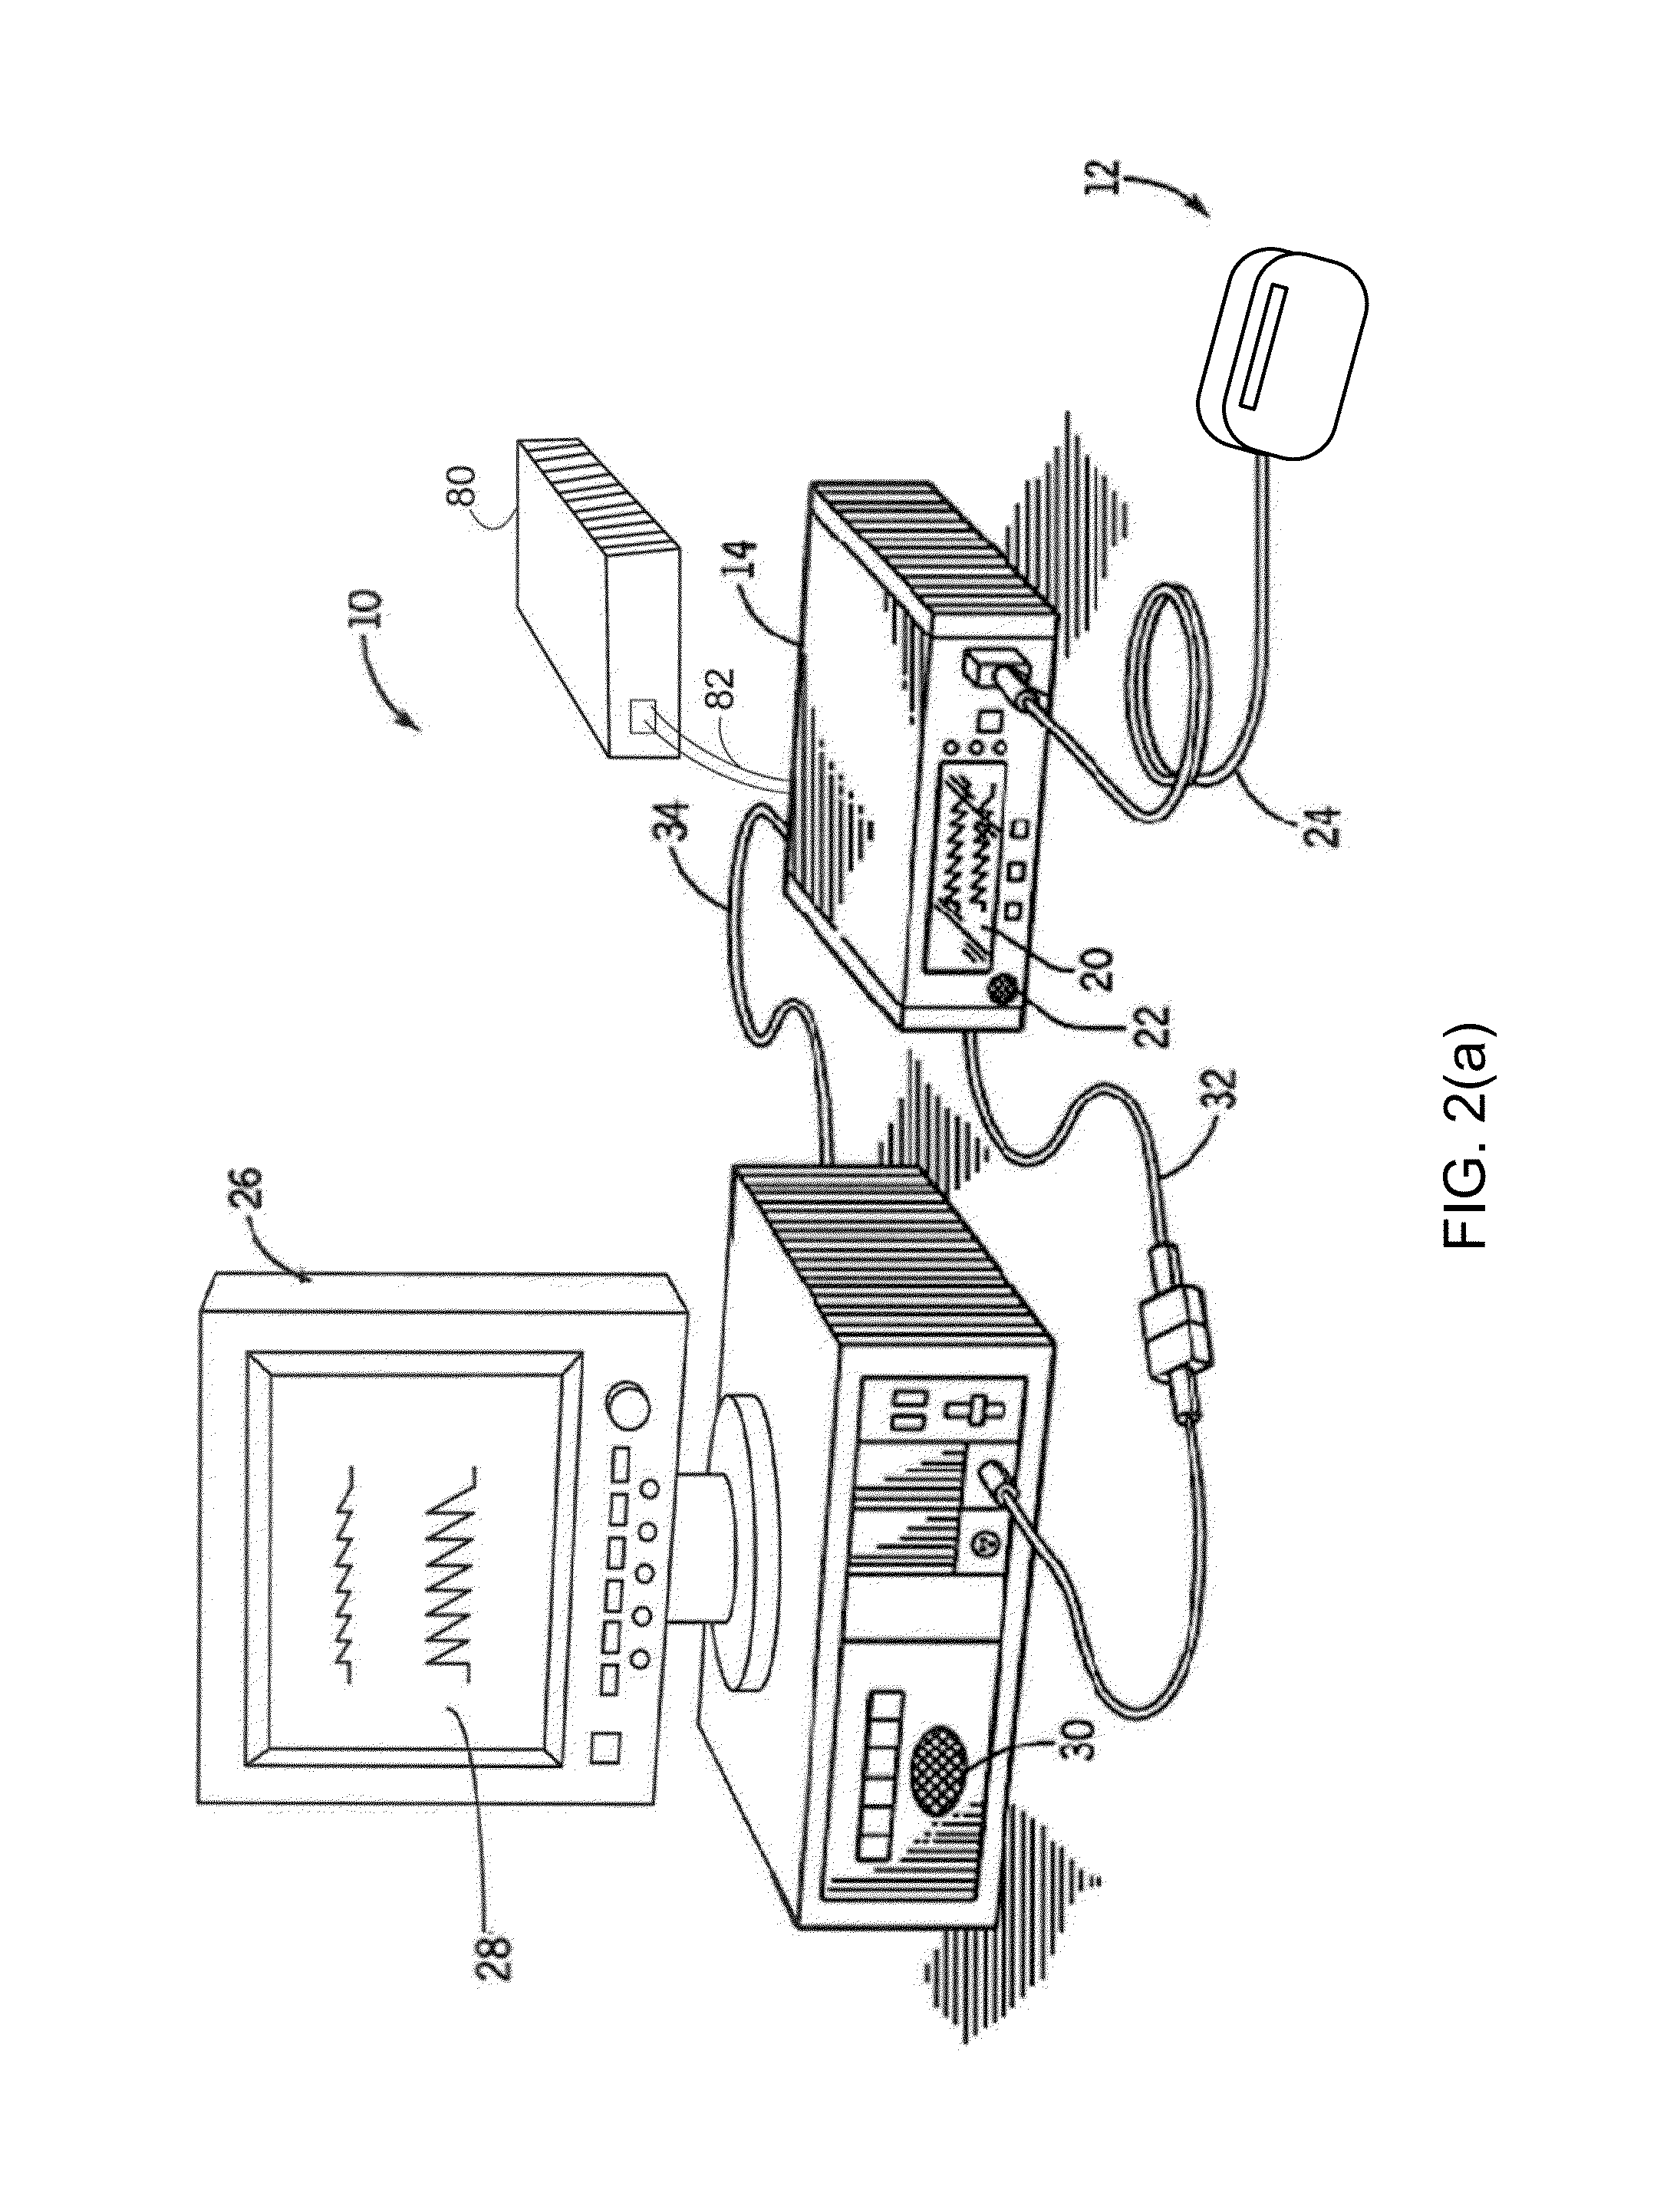 Systems and methods for non-invasive determination of blood pressure